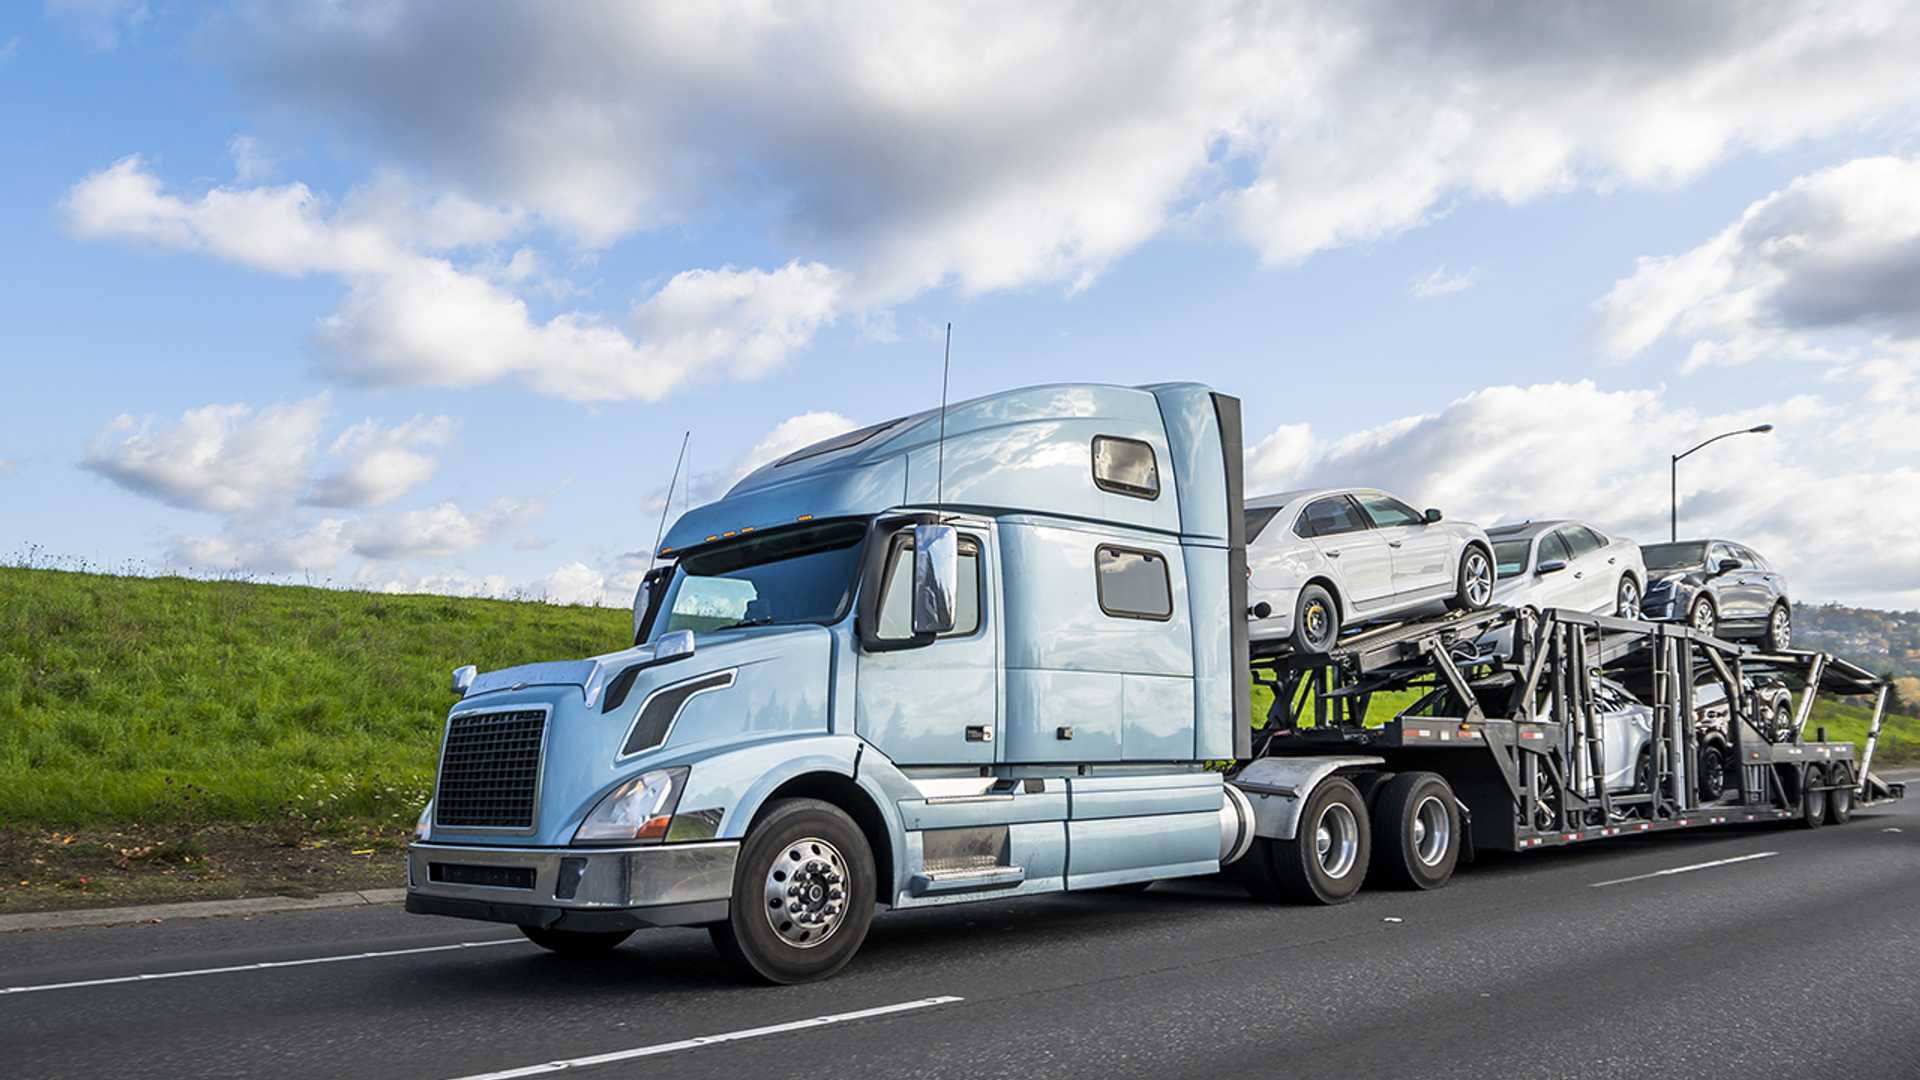 What are the 5 challenges accepted by car transport?